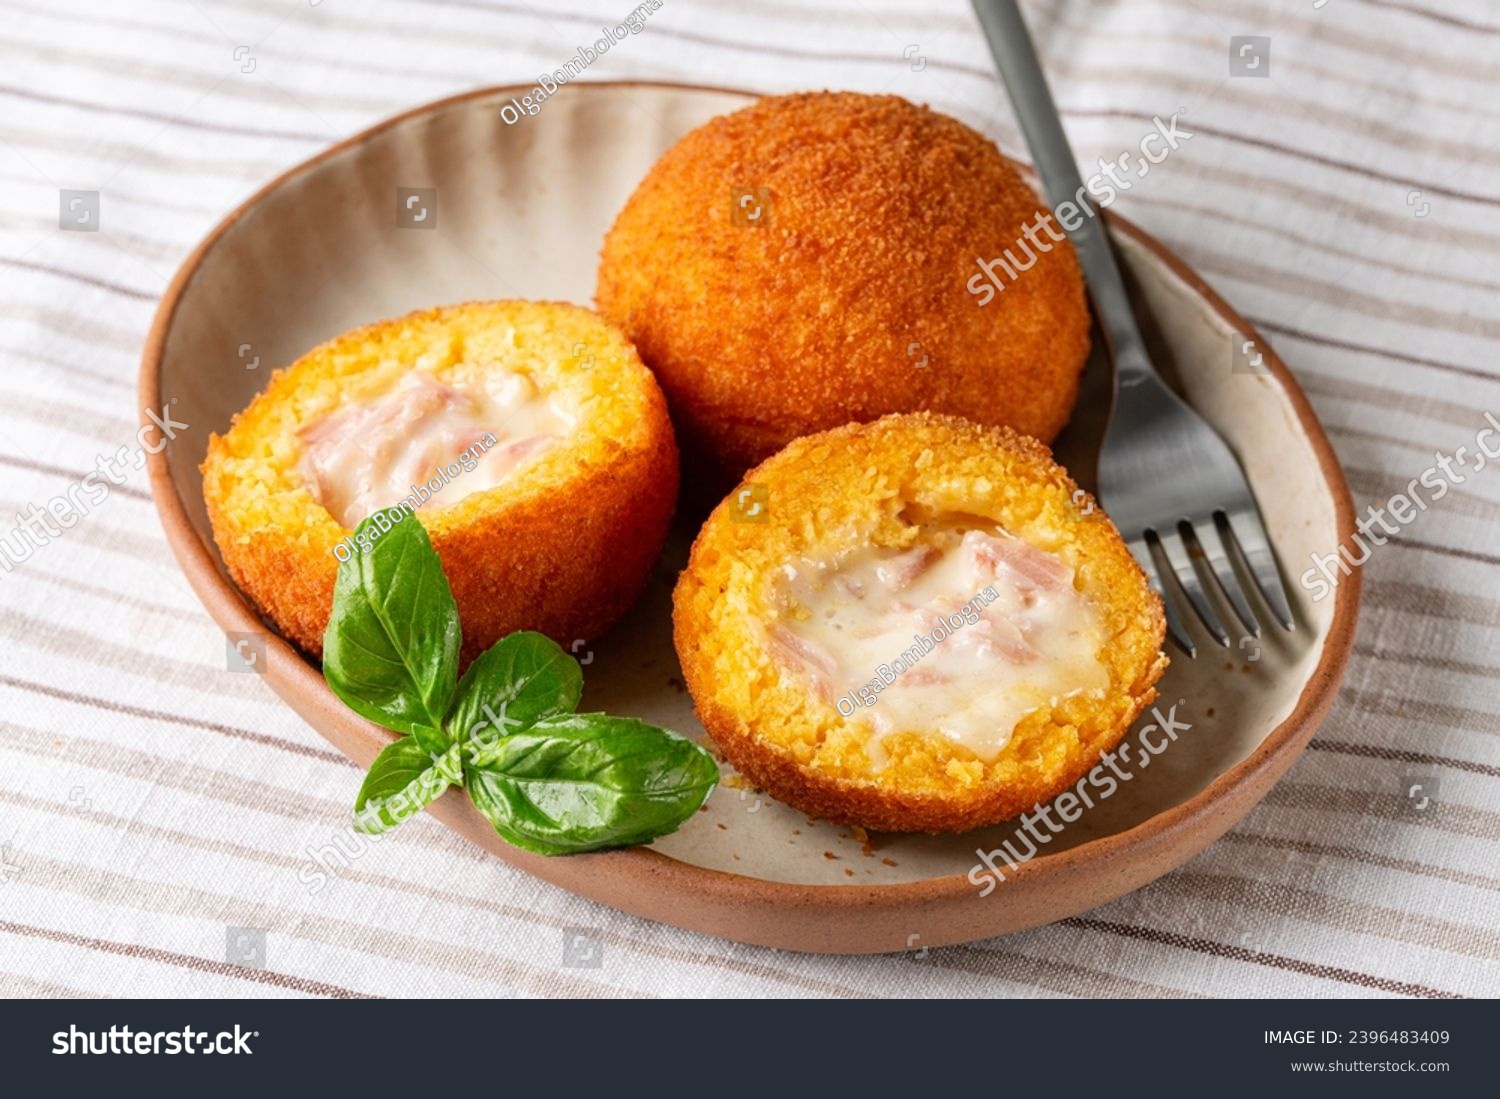 Arancini are Italian rice balls that are stuffed, filled with ham prosciutto and mozzarella, coated with breadcrumbs and deep fried.  Sicilian snack, street food.  #2396483409